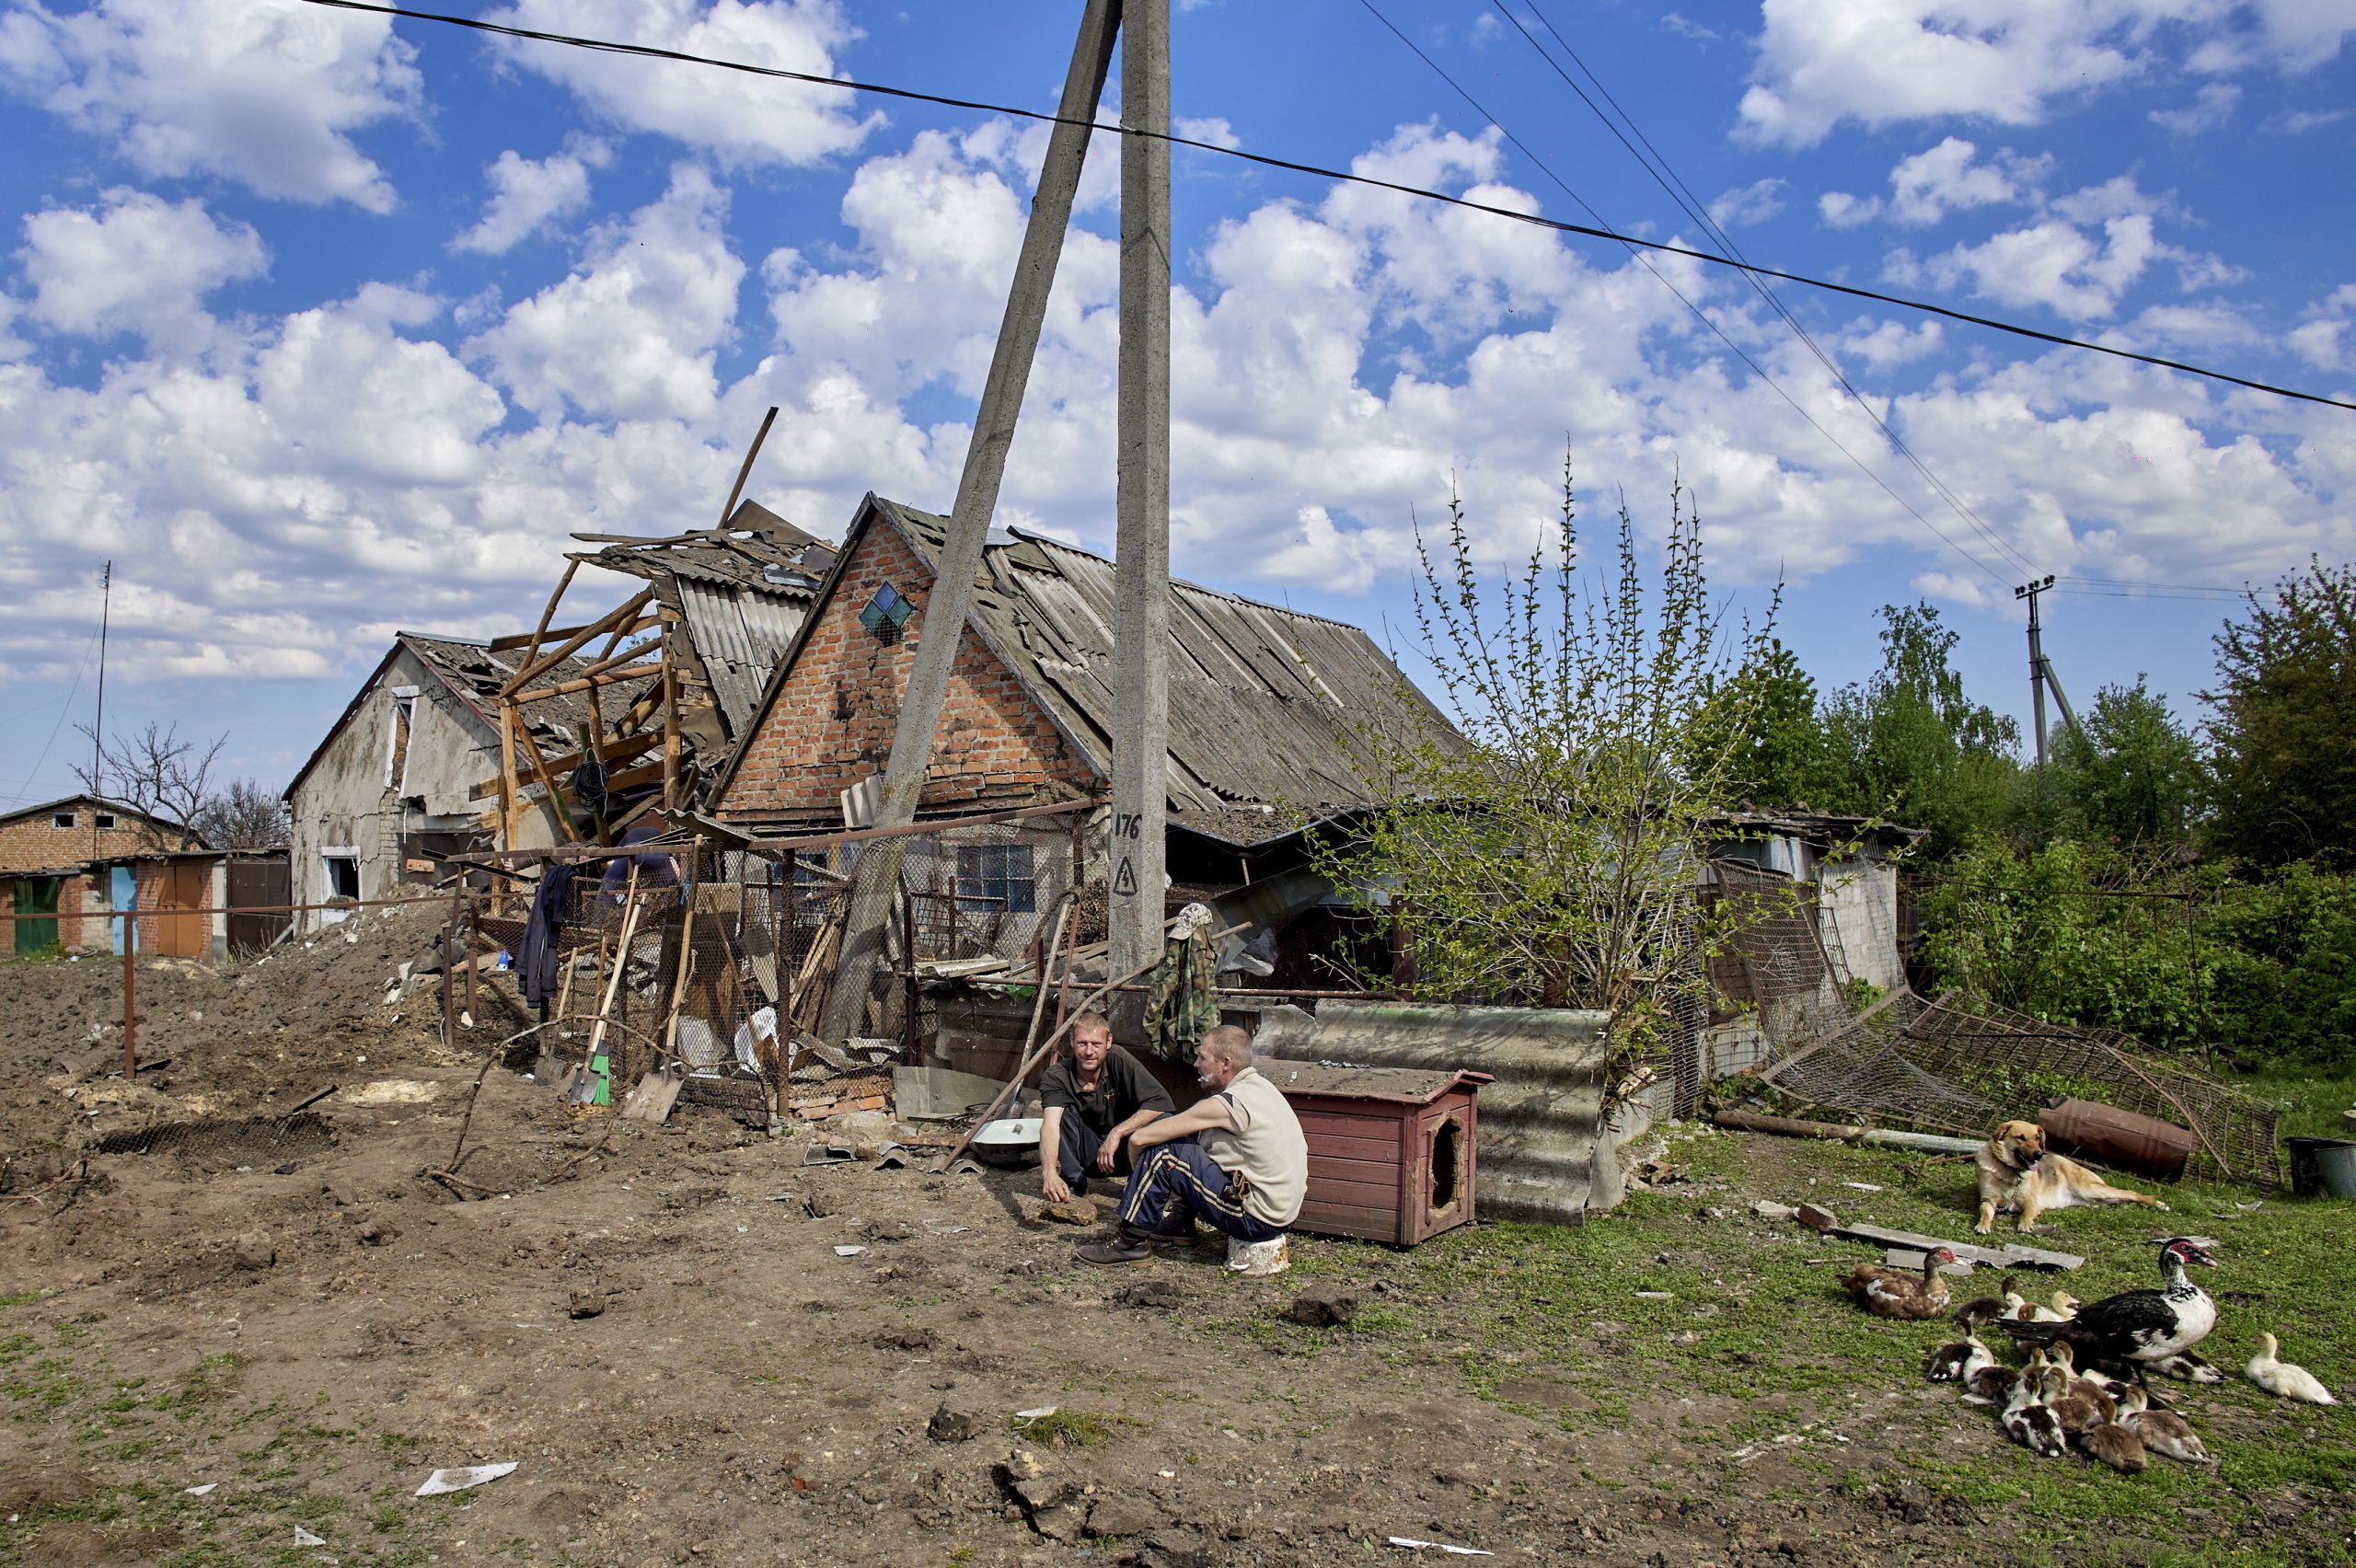 epa10627581 Locals sit next to a damaged building in the aftermath of a rocket attack in the Zolochiv settlement of the Kharkiv's area, Ukraine, 14 May 2023, amid the Russian invasion. Russian troops carried out S-300 missile strikes on Kharkiv and the Zolochiv settlement in the Kharkiv district on the night between 13 and 14 May. Some buildings and a transport infrastructure were damaged, the head of the Kharkiv Regional Civil-Military Administration Oleg Synegubov announced on 14 May. No victims were reported.  EPA/SERGEY KOZLOV